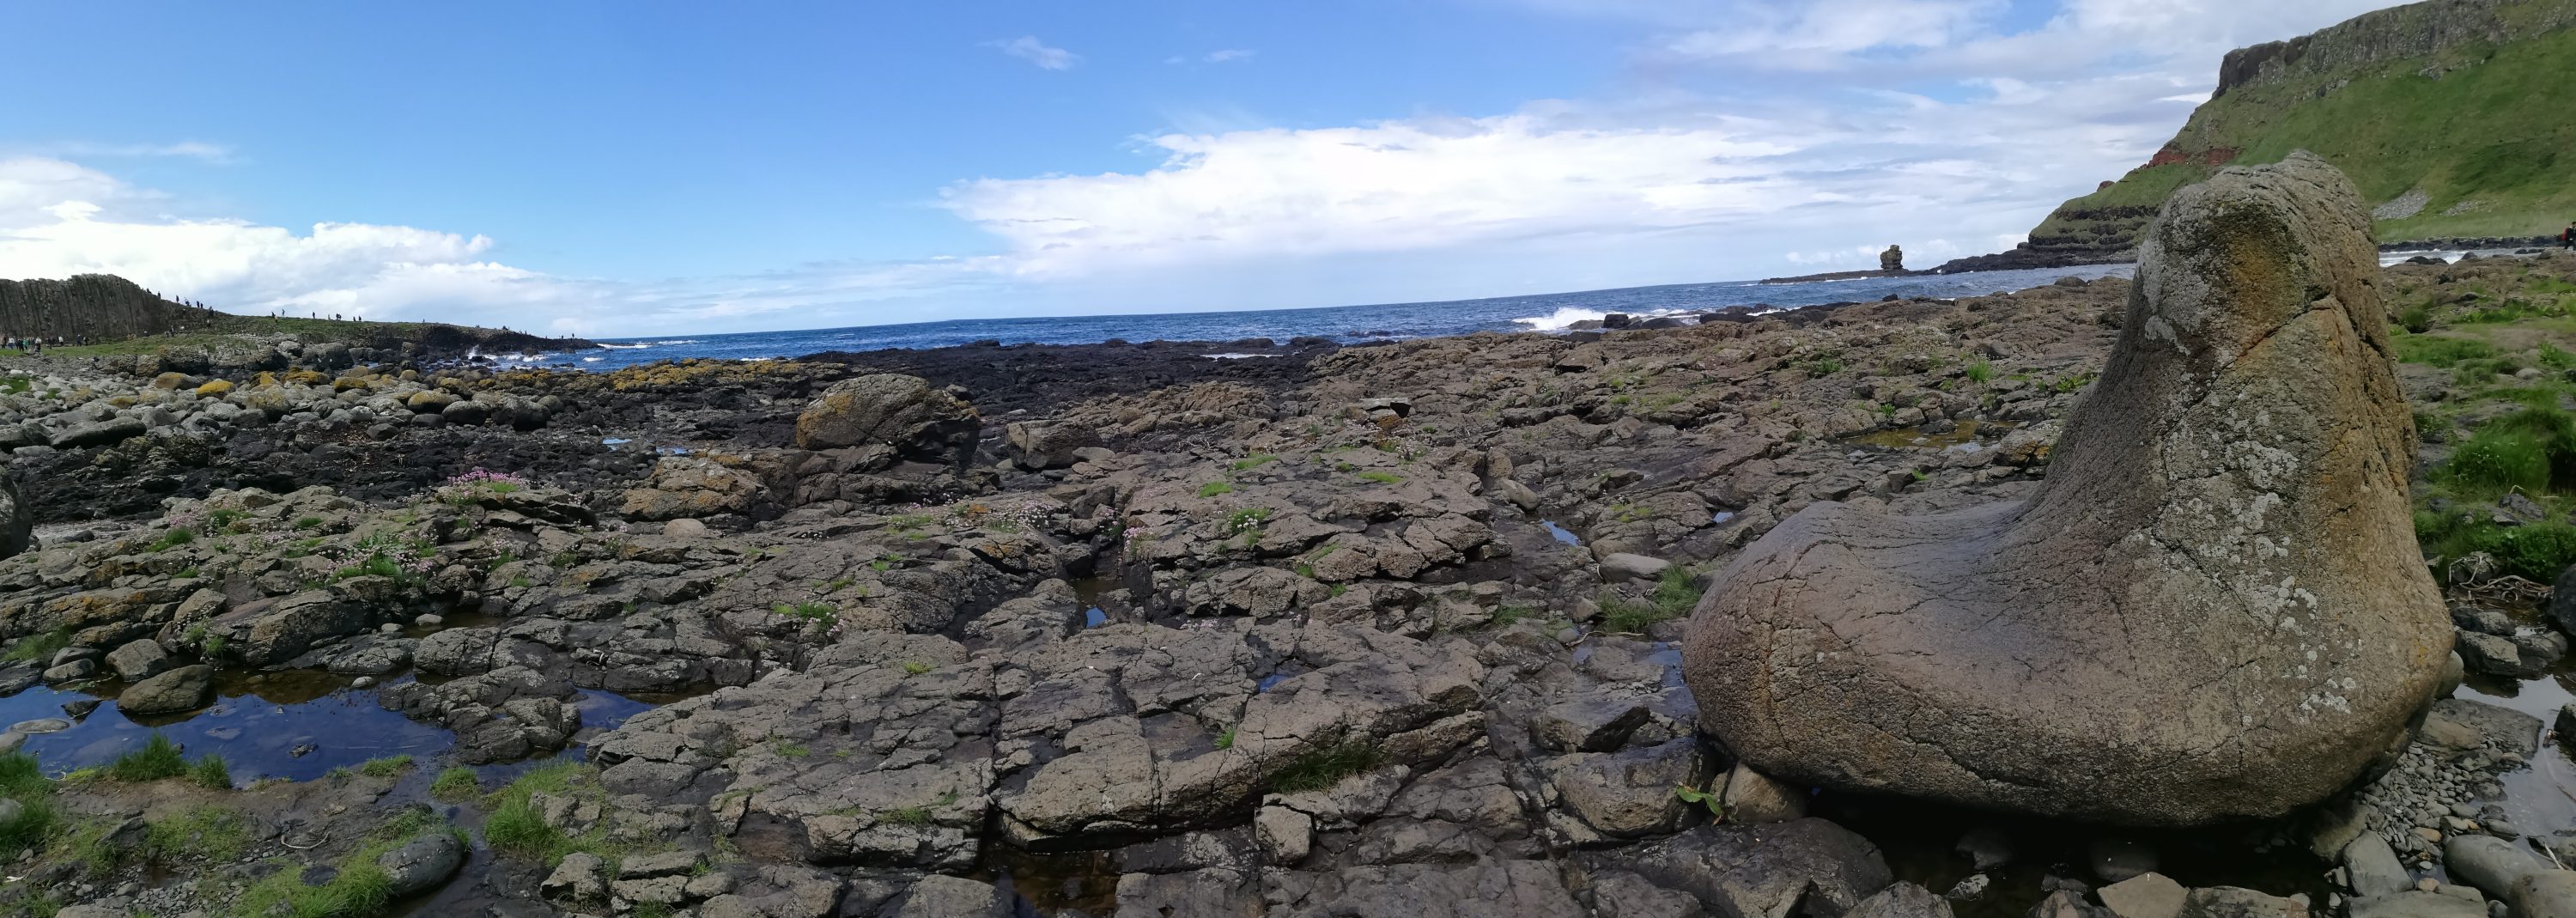 Giant's Causeway - Giant's boots